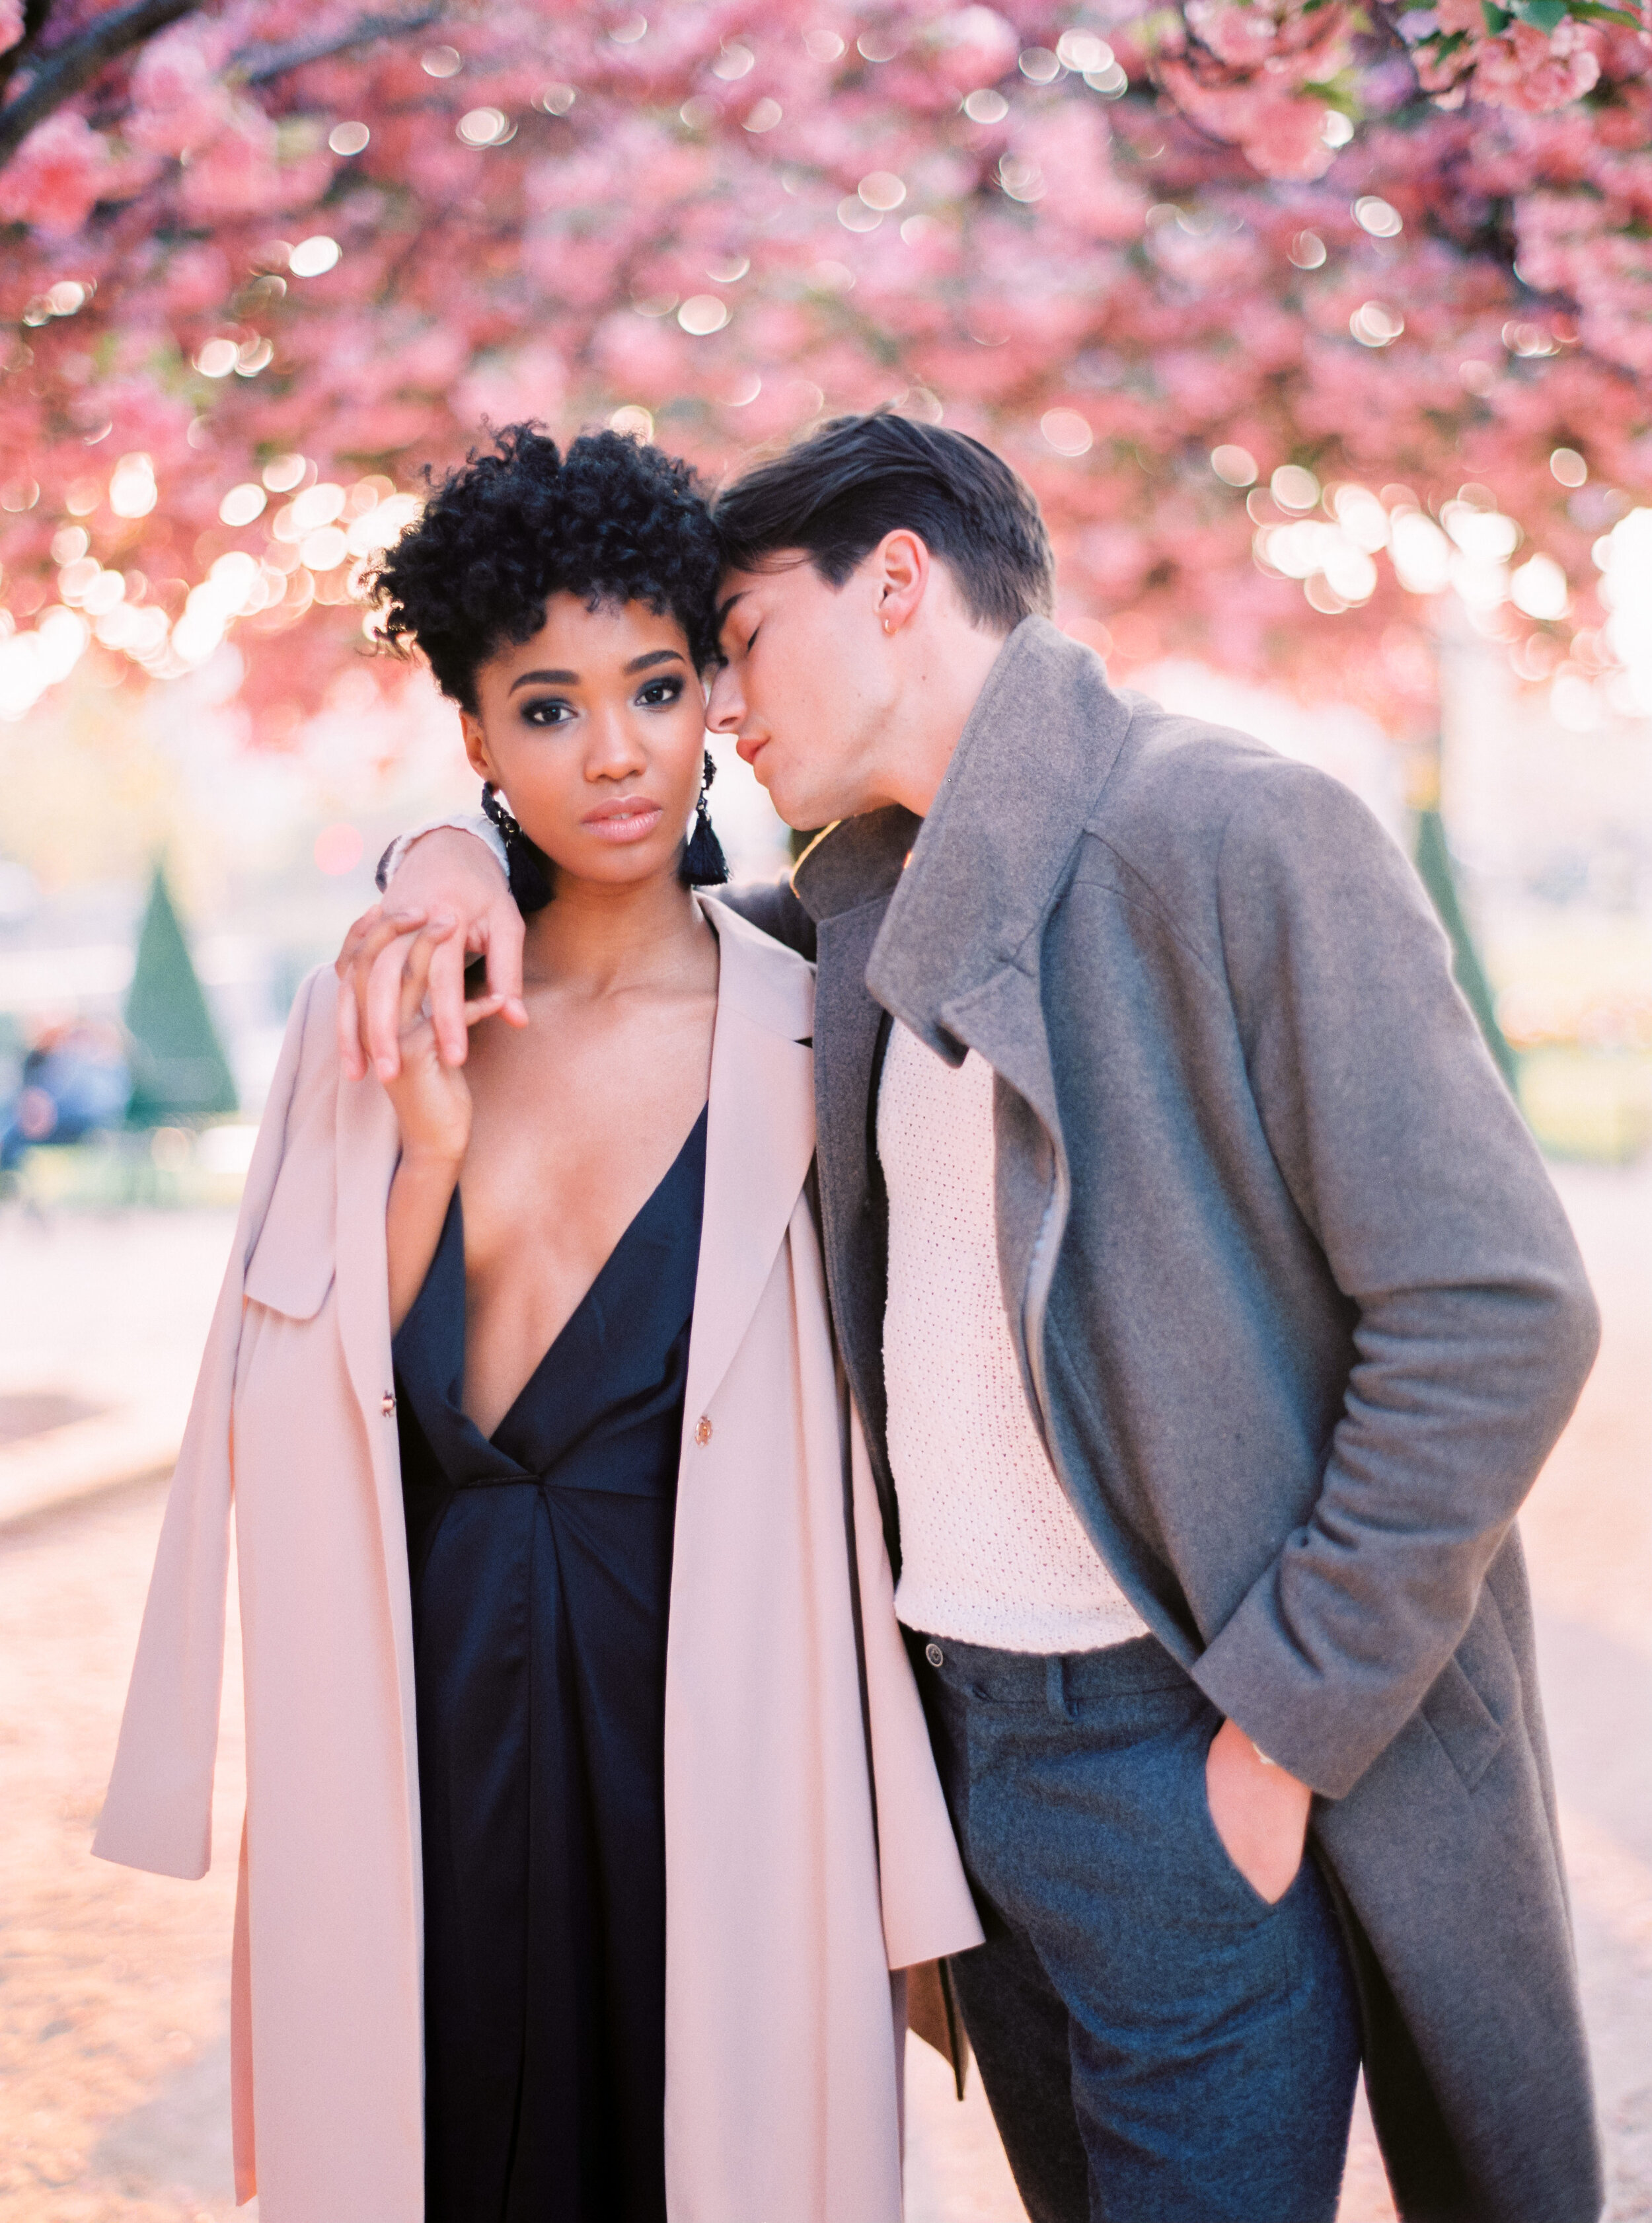 How to Make the Most of Your Makeup for Your Paris Engagement Photoshoot by  Onorina Jomir Beauty — Makeup Artist in Paris, Onorina Jomir